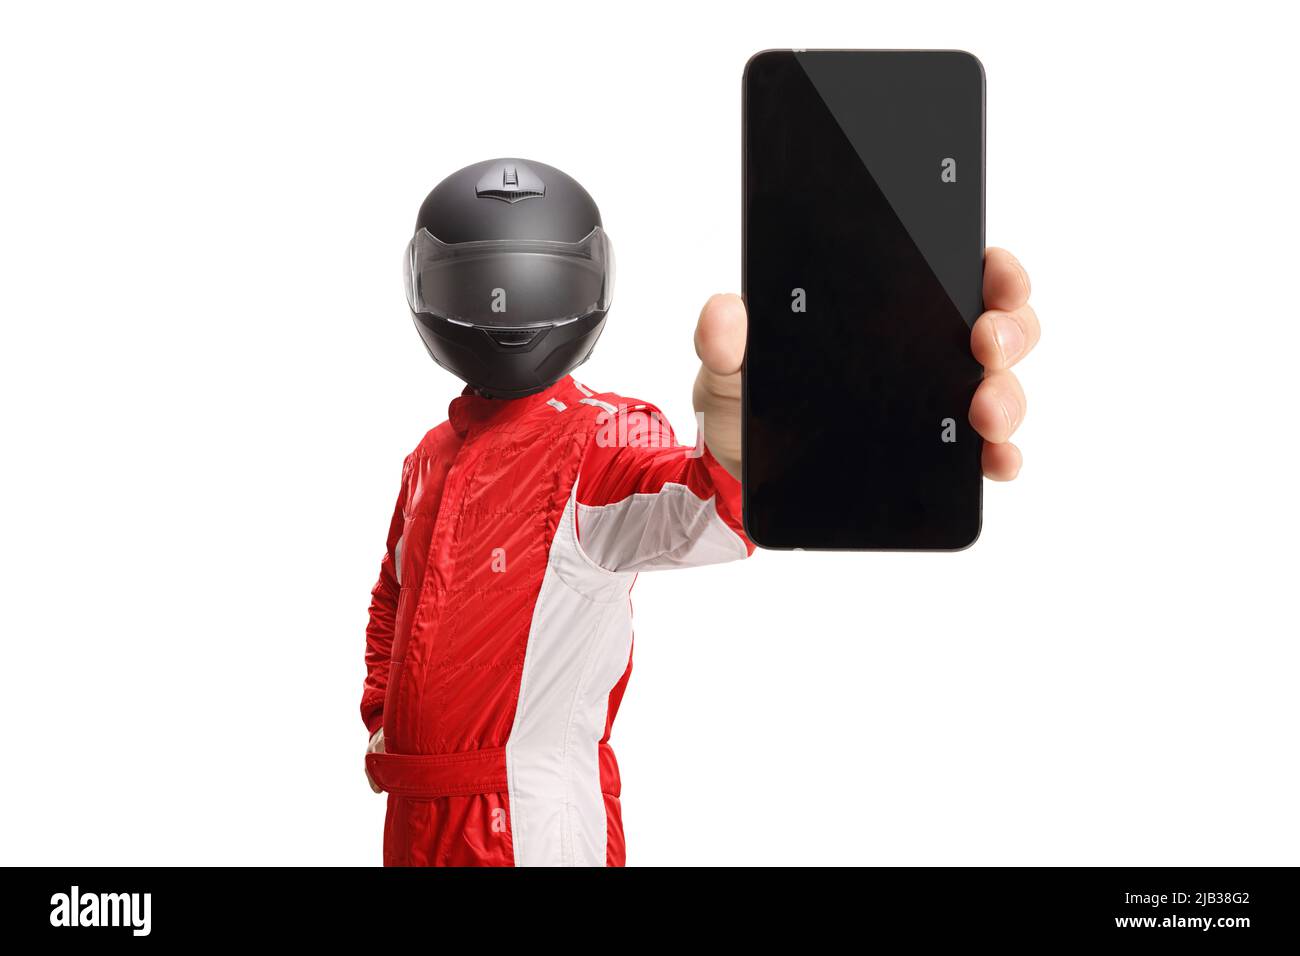 Racer with a helmet holding a smartphone isolated on white background Stock Photo